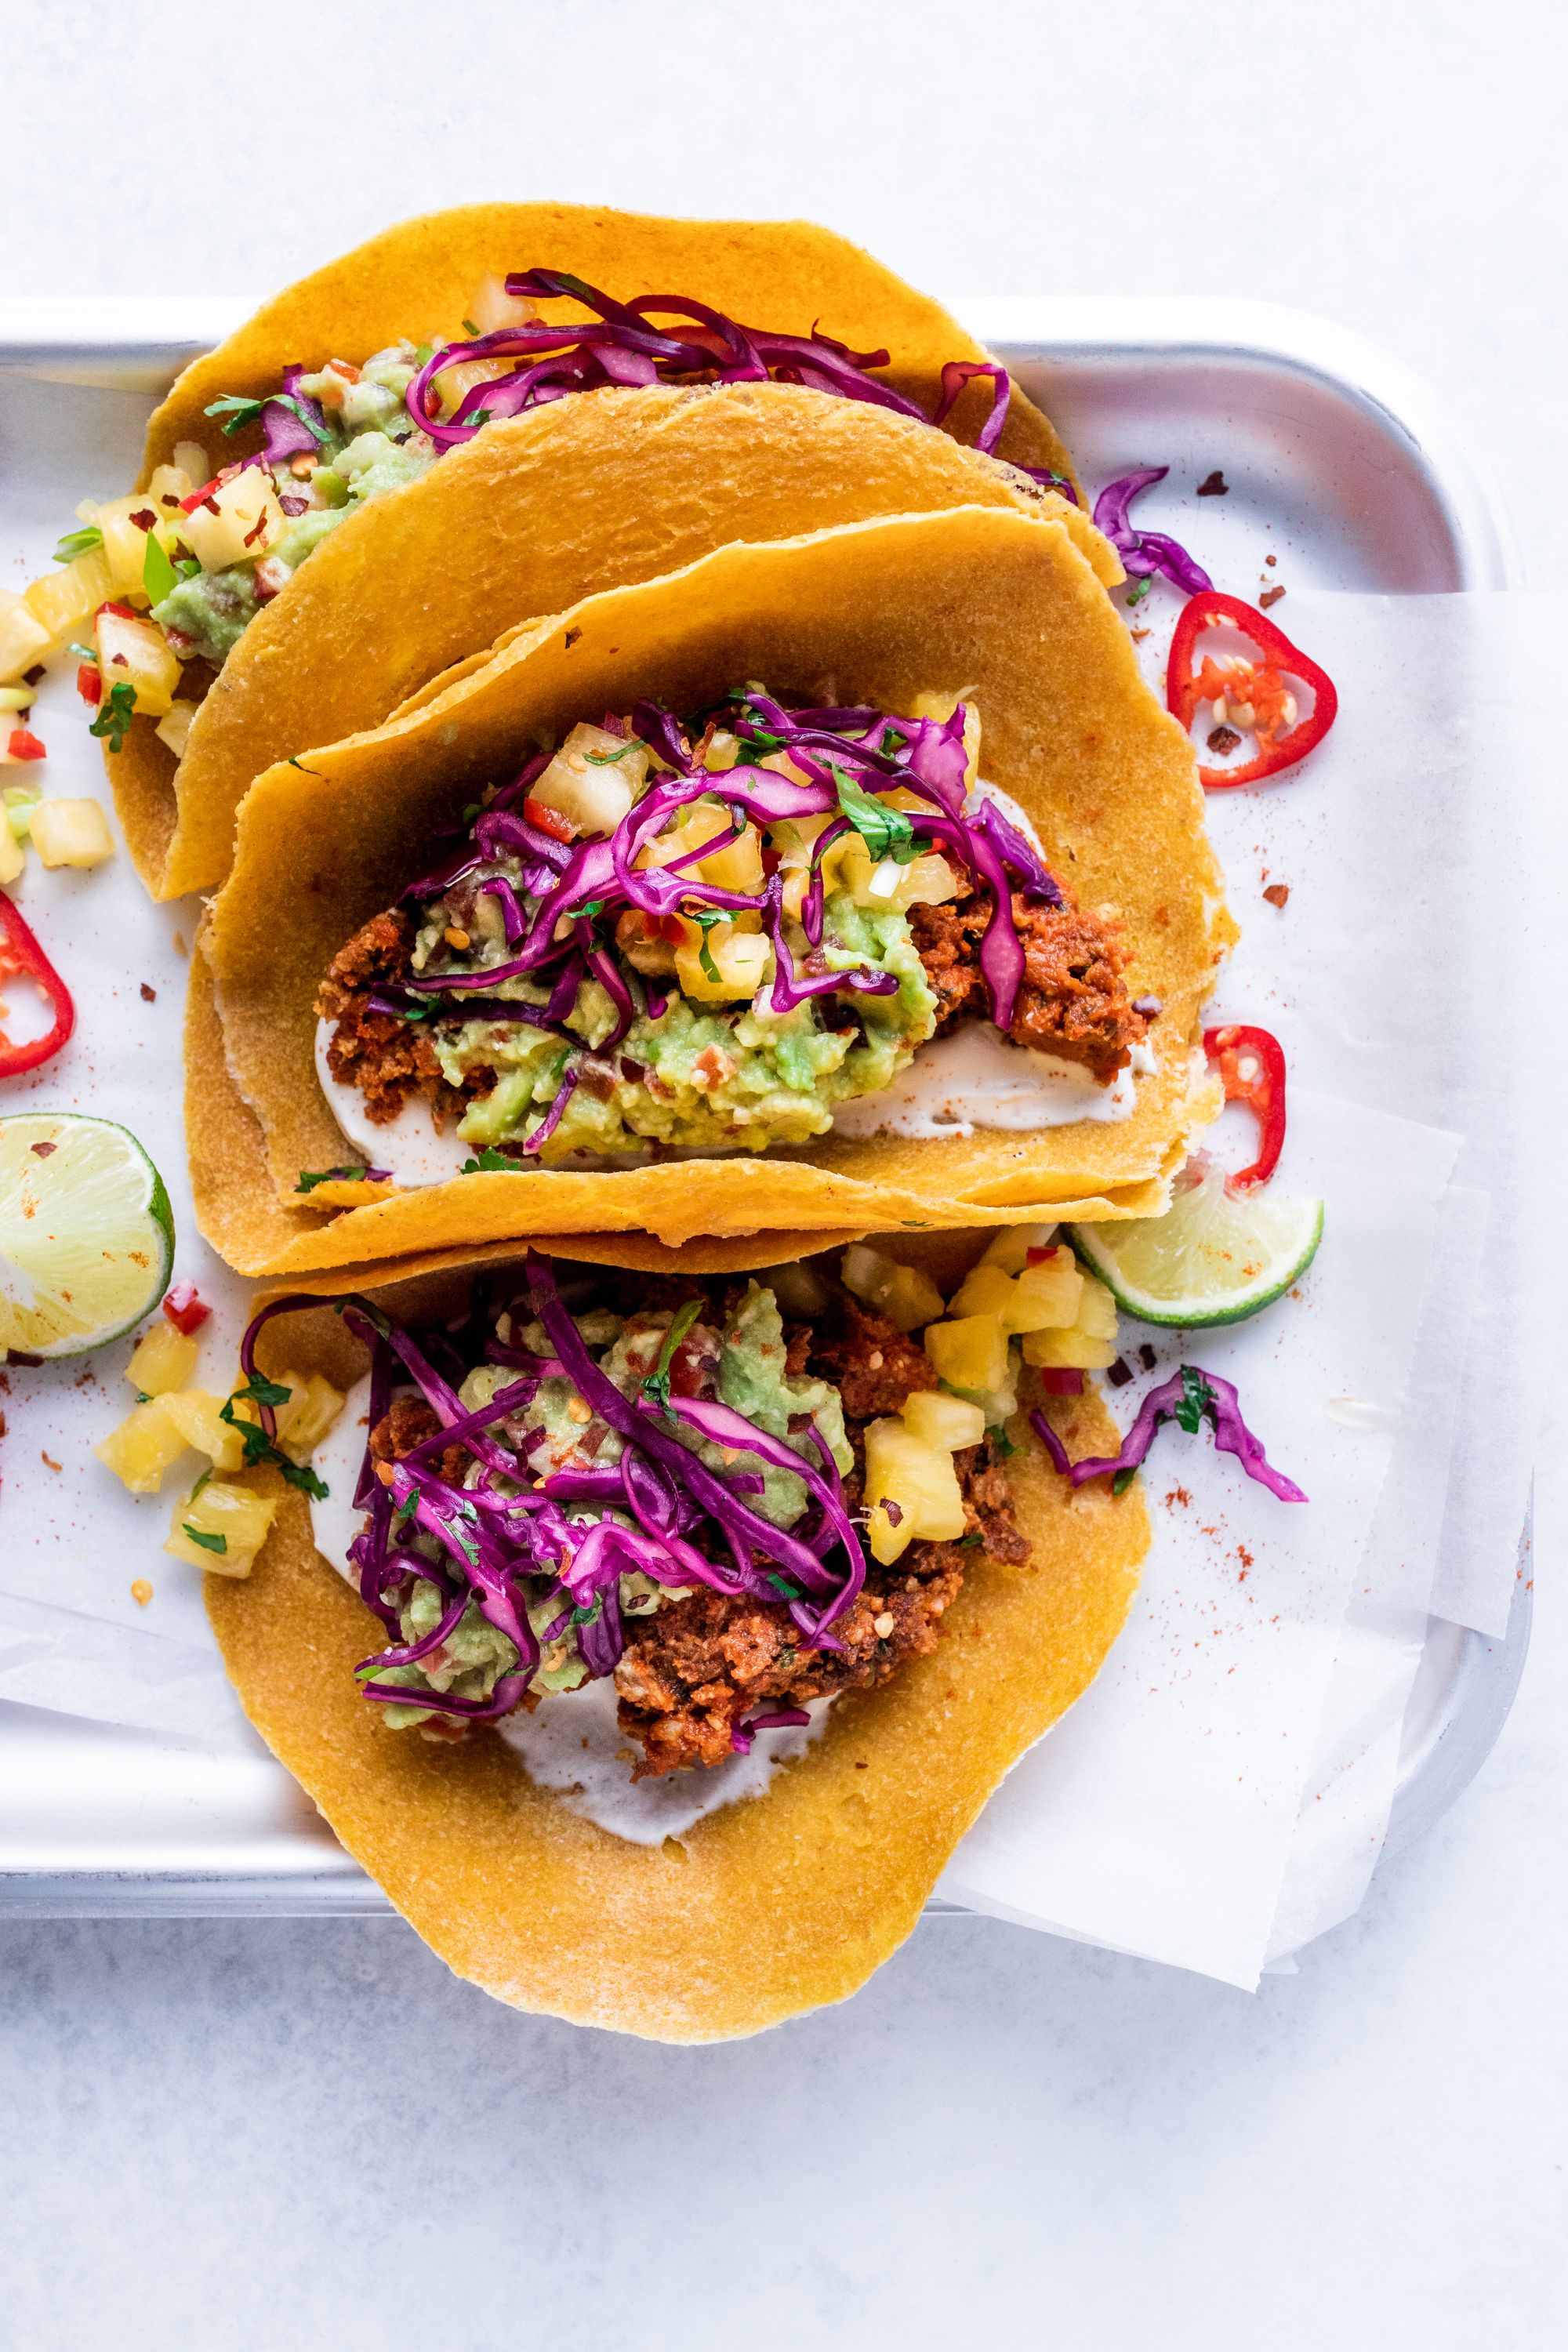 Raw vegan tacos with sunflower taco meat, cashew sour cream, guacamole and pineapple salsa